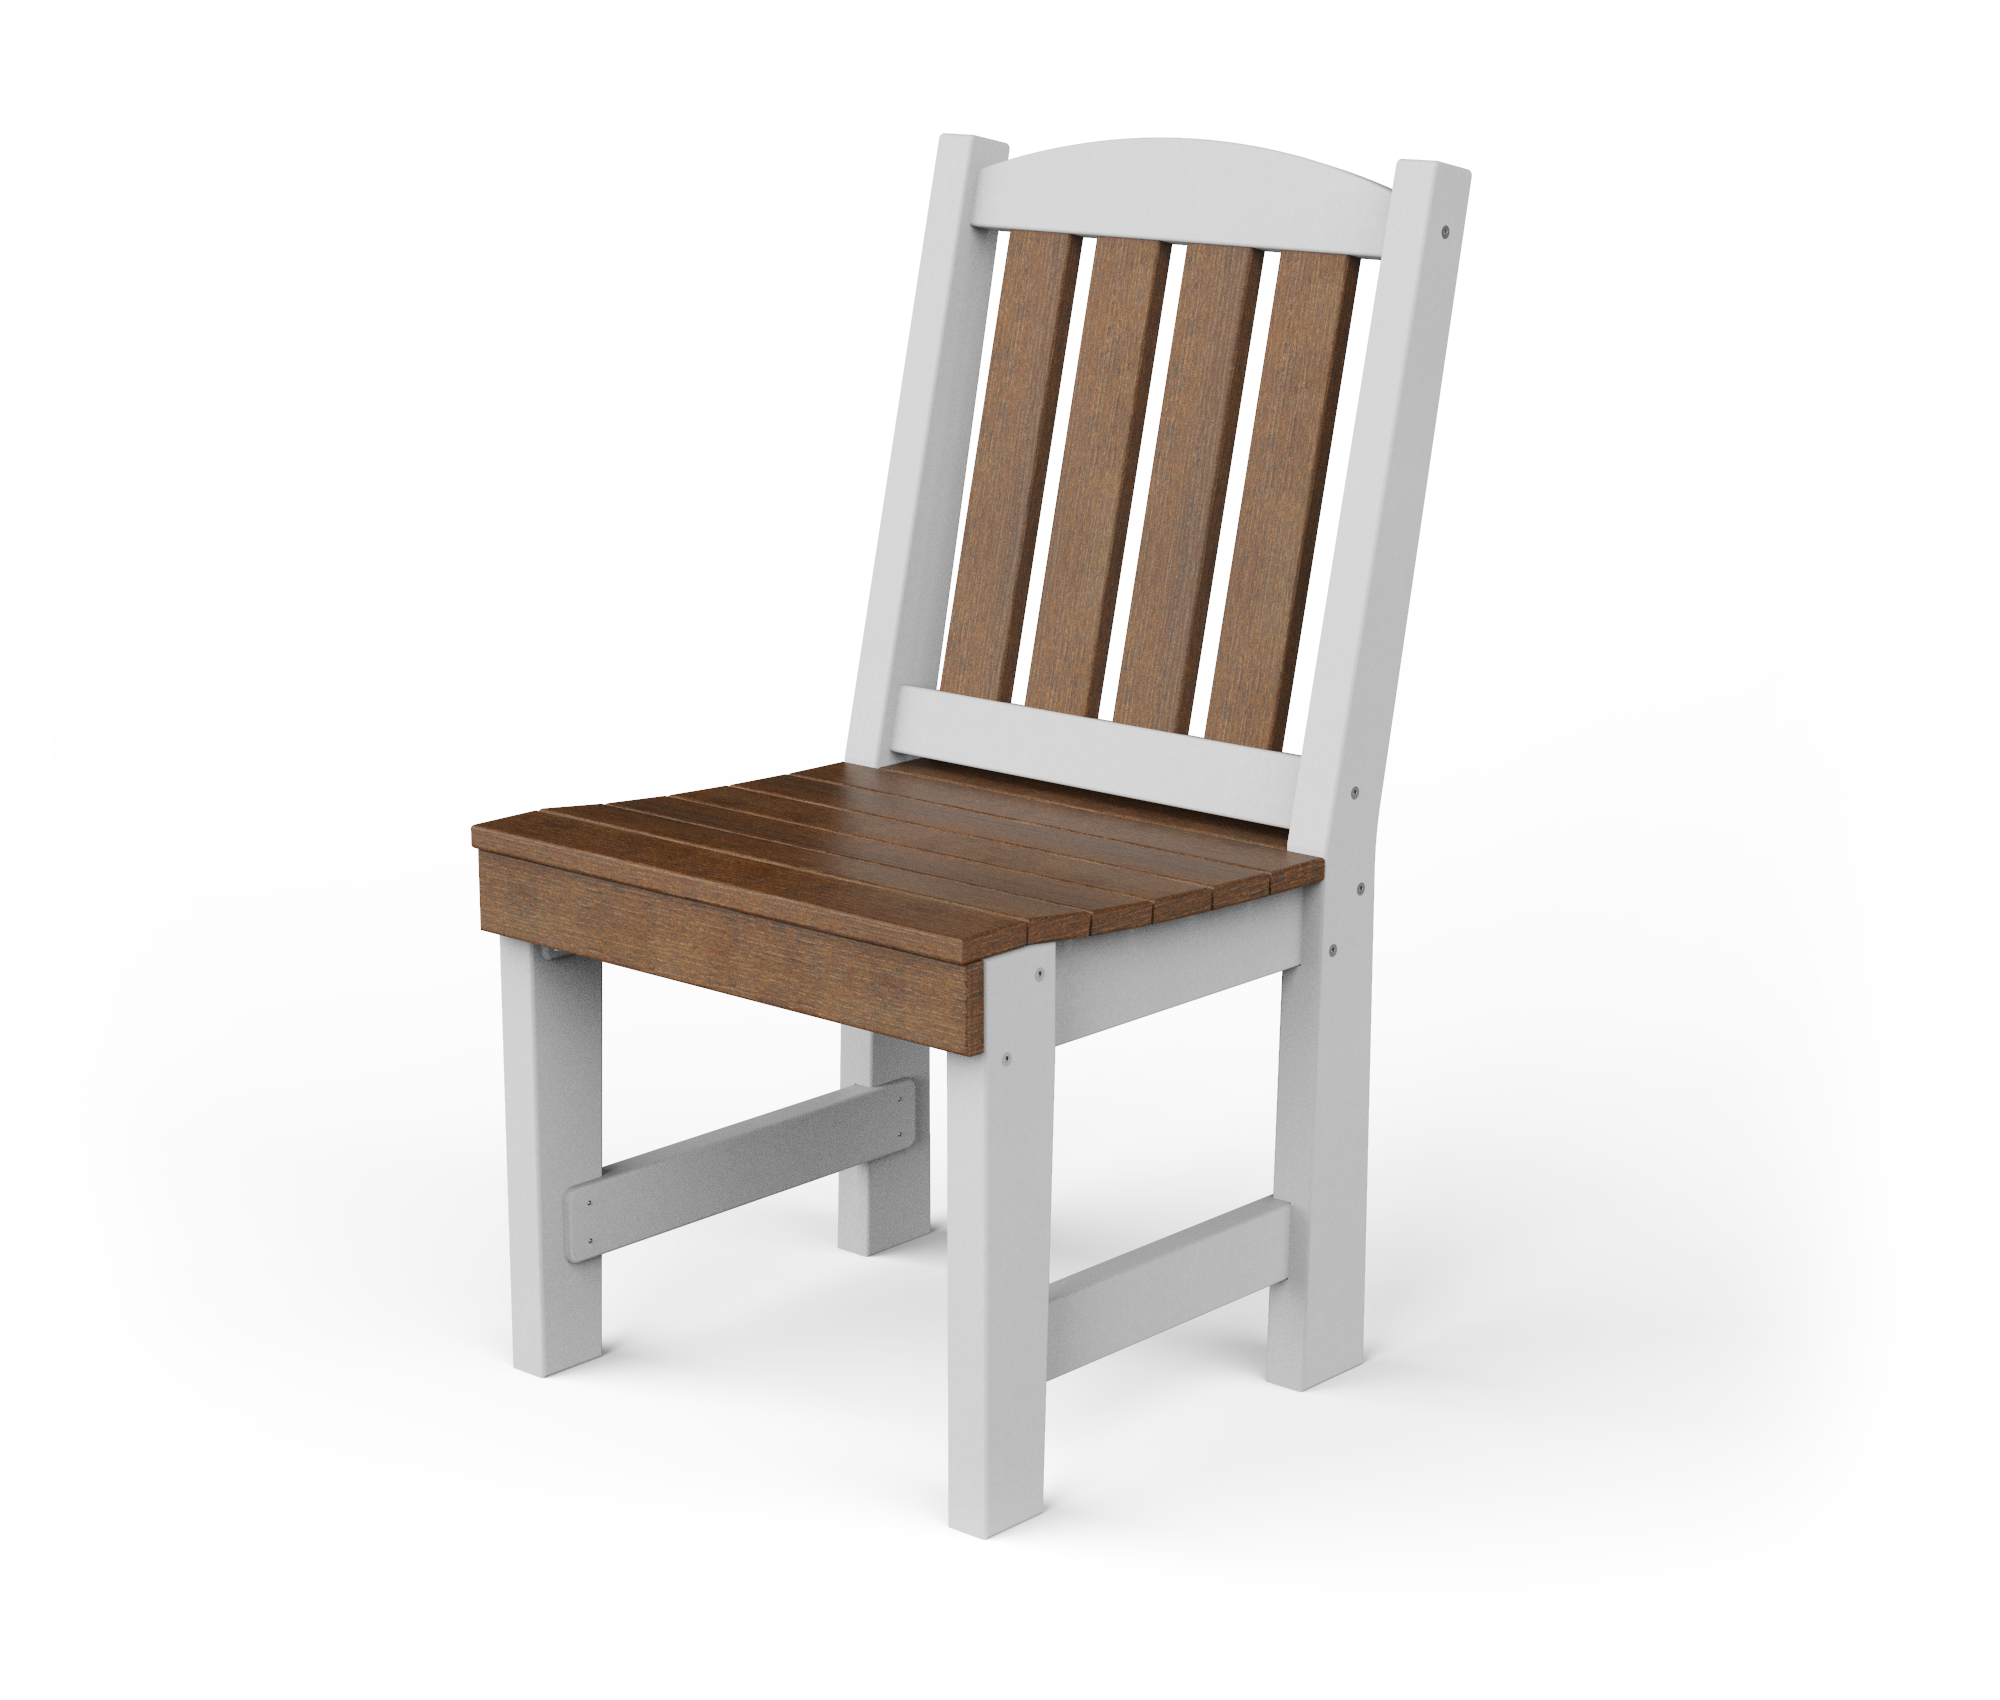 Poly, English Garden, dining chair.